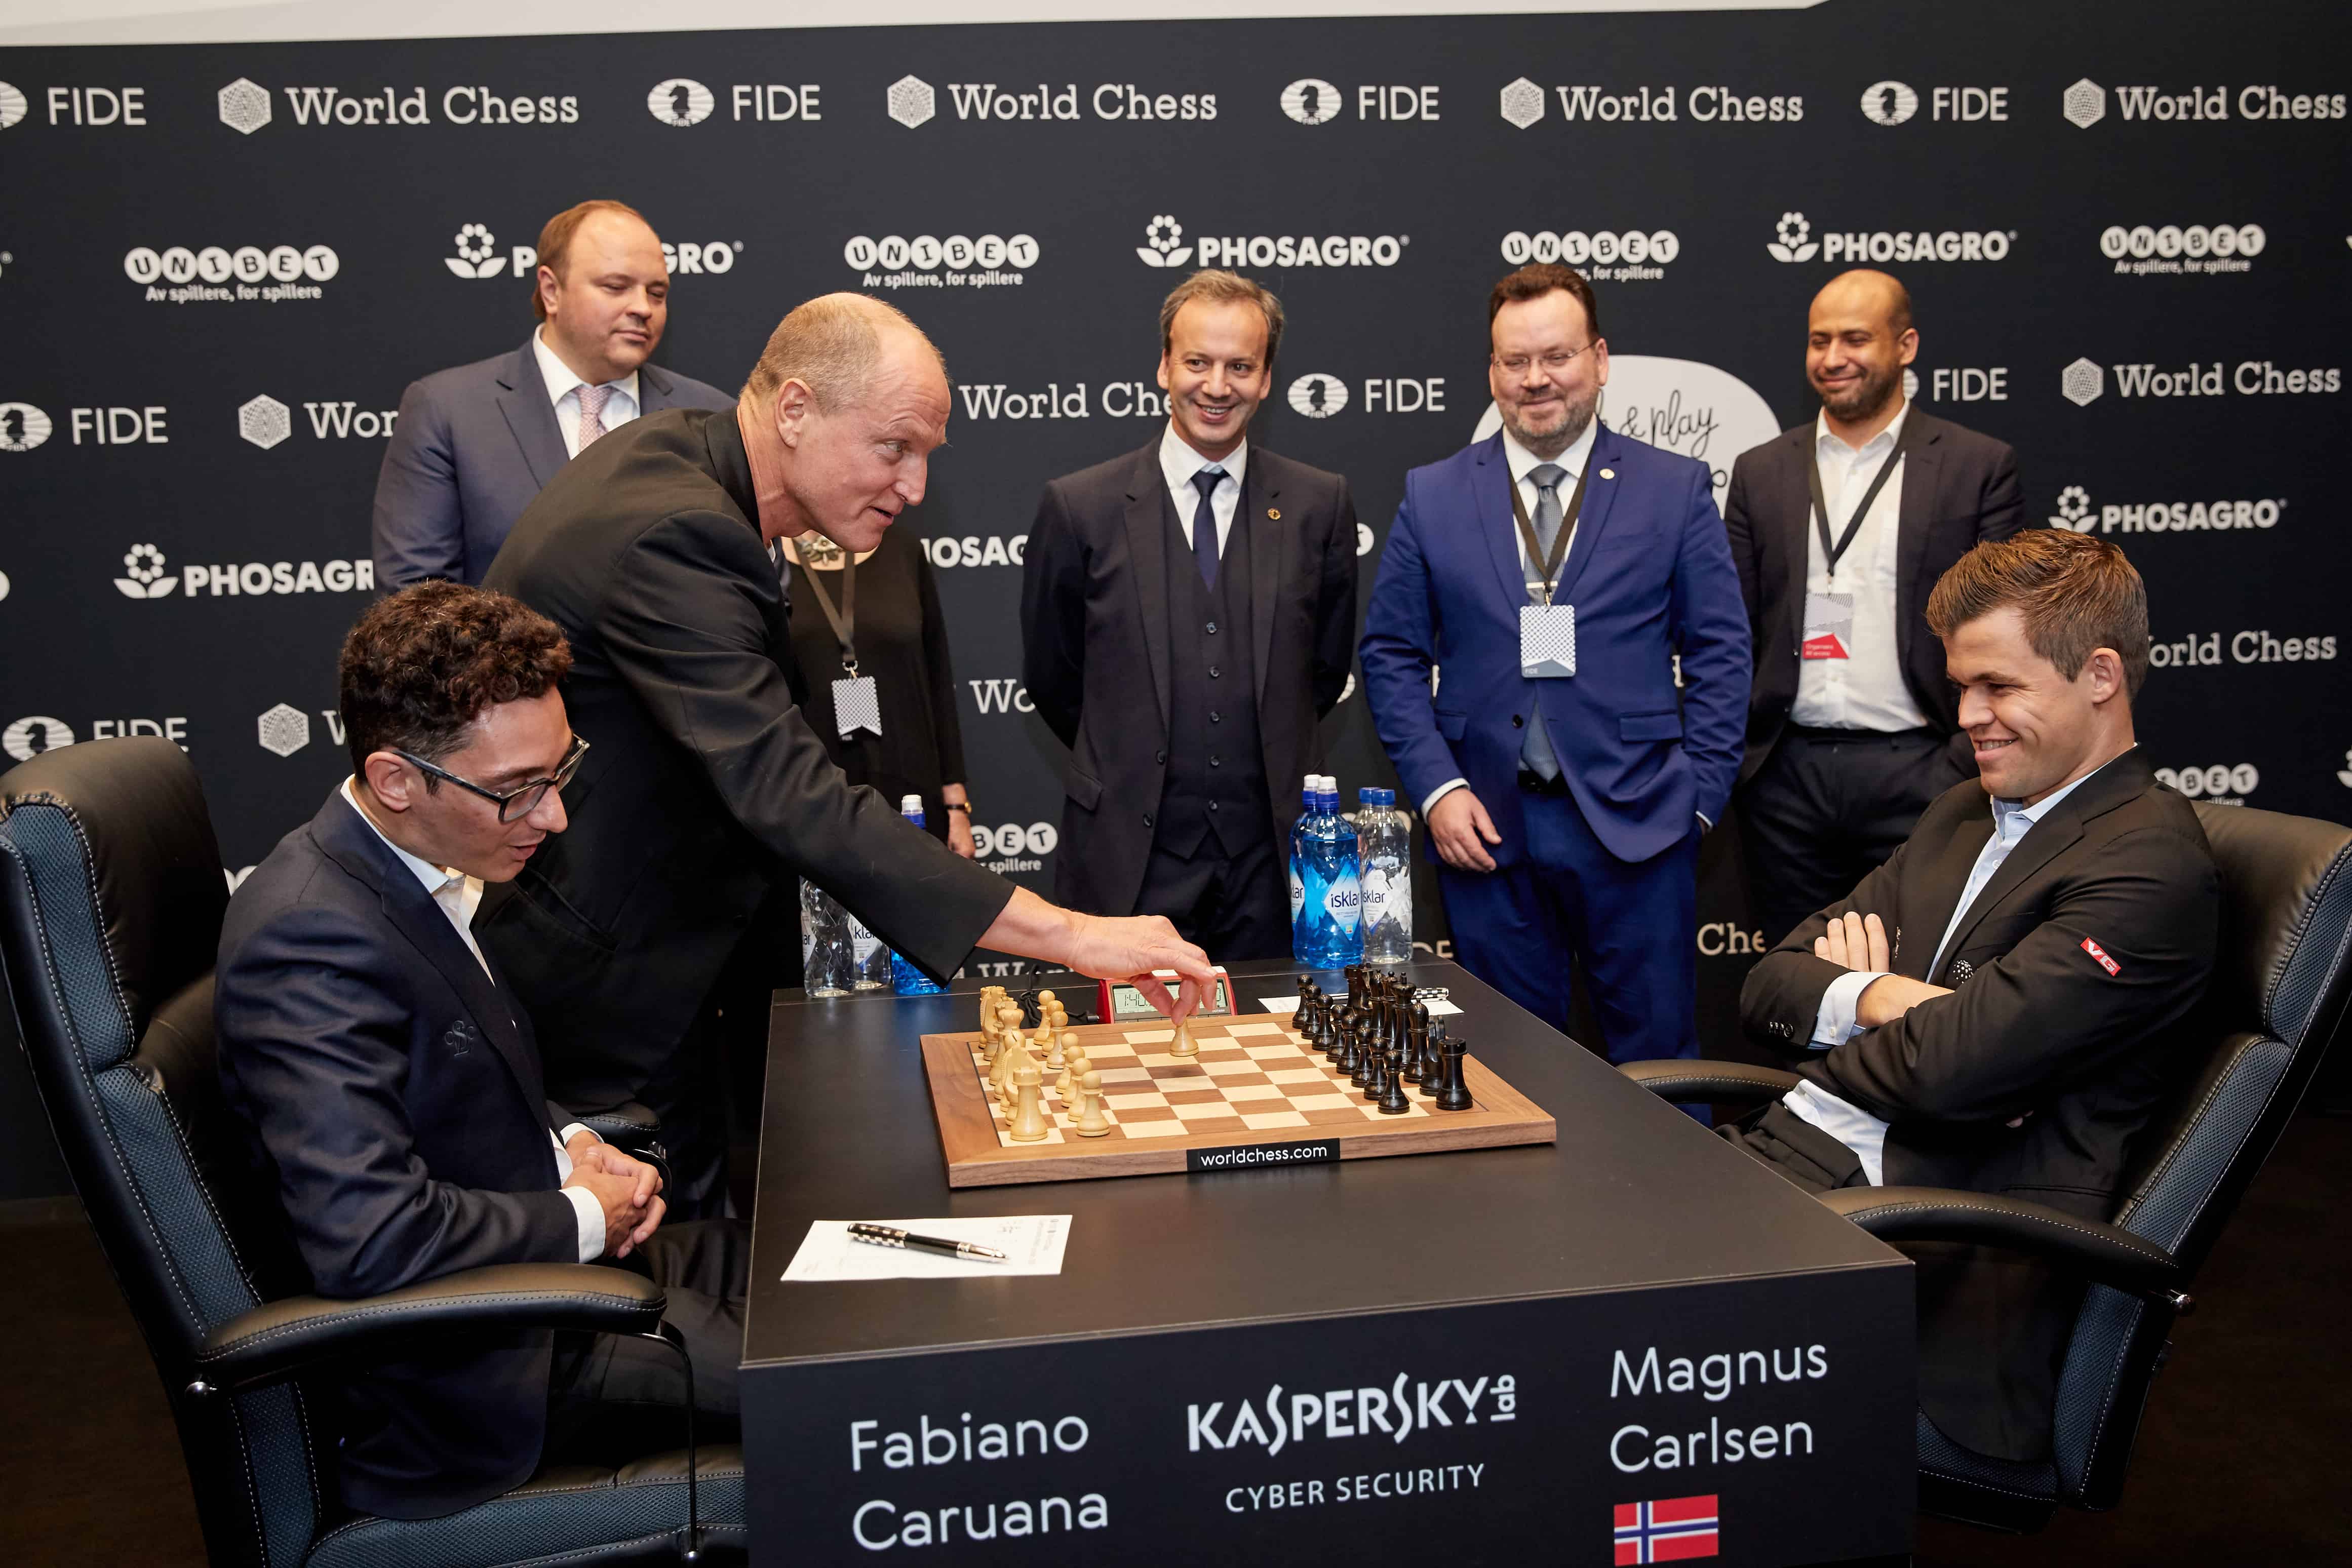 Andrey Guryev, Vice President and Member of the Board of Trustees of the Russian Chess Federation, CEO of PhosAgro, Woody Harrelson, Arkady Dvorkovich, President of FIDE, Stepahne Escafre, The Chief Arbiter of the Match, Ilya Merenzon, CEO of World Chess, Magnus Carlsen, the reigning World Chess Champion and Fabiano Caruana, US Challenger during the First Move Ceremony (Round 1) of the FIDE World Chess Championship Match 2018 on November 9, 2018 in London, England. (Photo by Tristan Fewings/Getty Images for World Chess ) *** Local Caption *** Andrey Guryev; Woody Harrelson; Arkady Dvorkovich; Stepahne Escafre; Ilya Merenzon; Magnus Carlsen; Fabiano Caruana